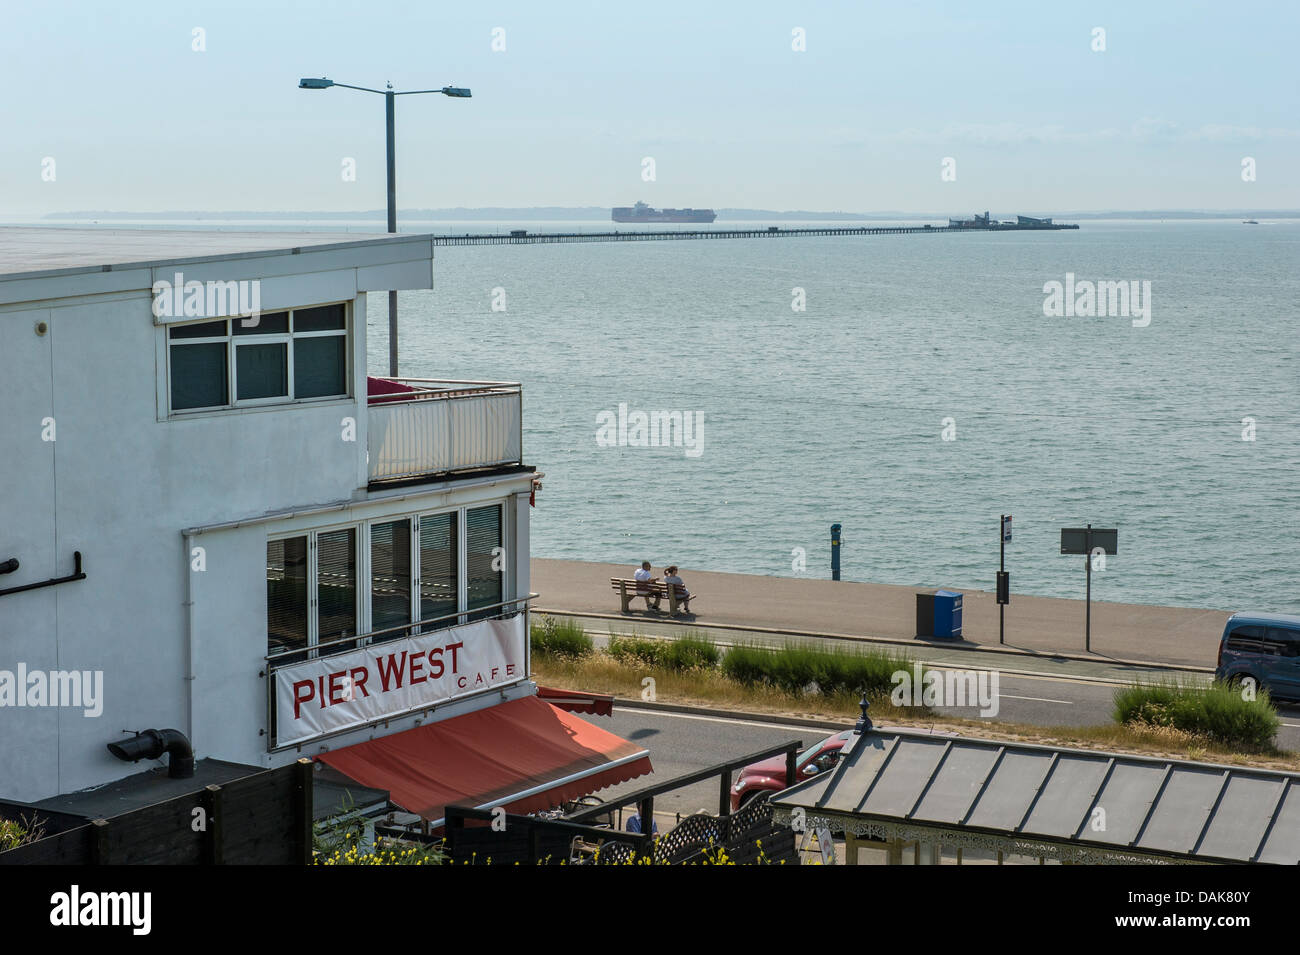 Pier West restaurant which overlooks the seafront and pier at Southend on sea,Essex, UK. Stock Photo